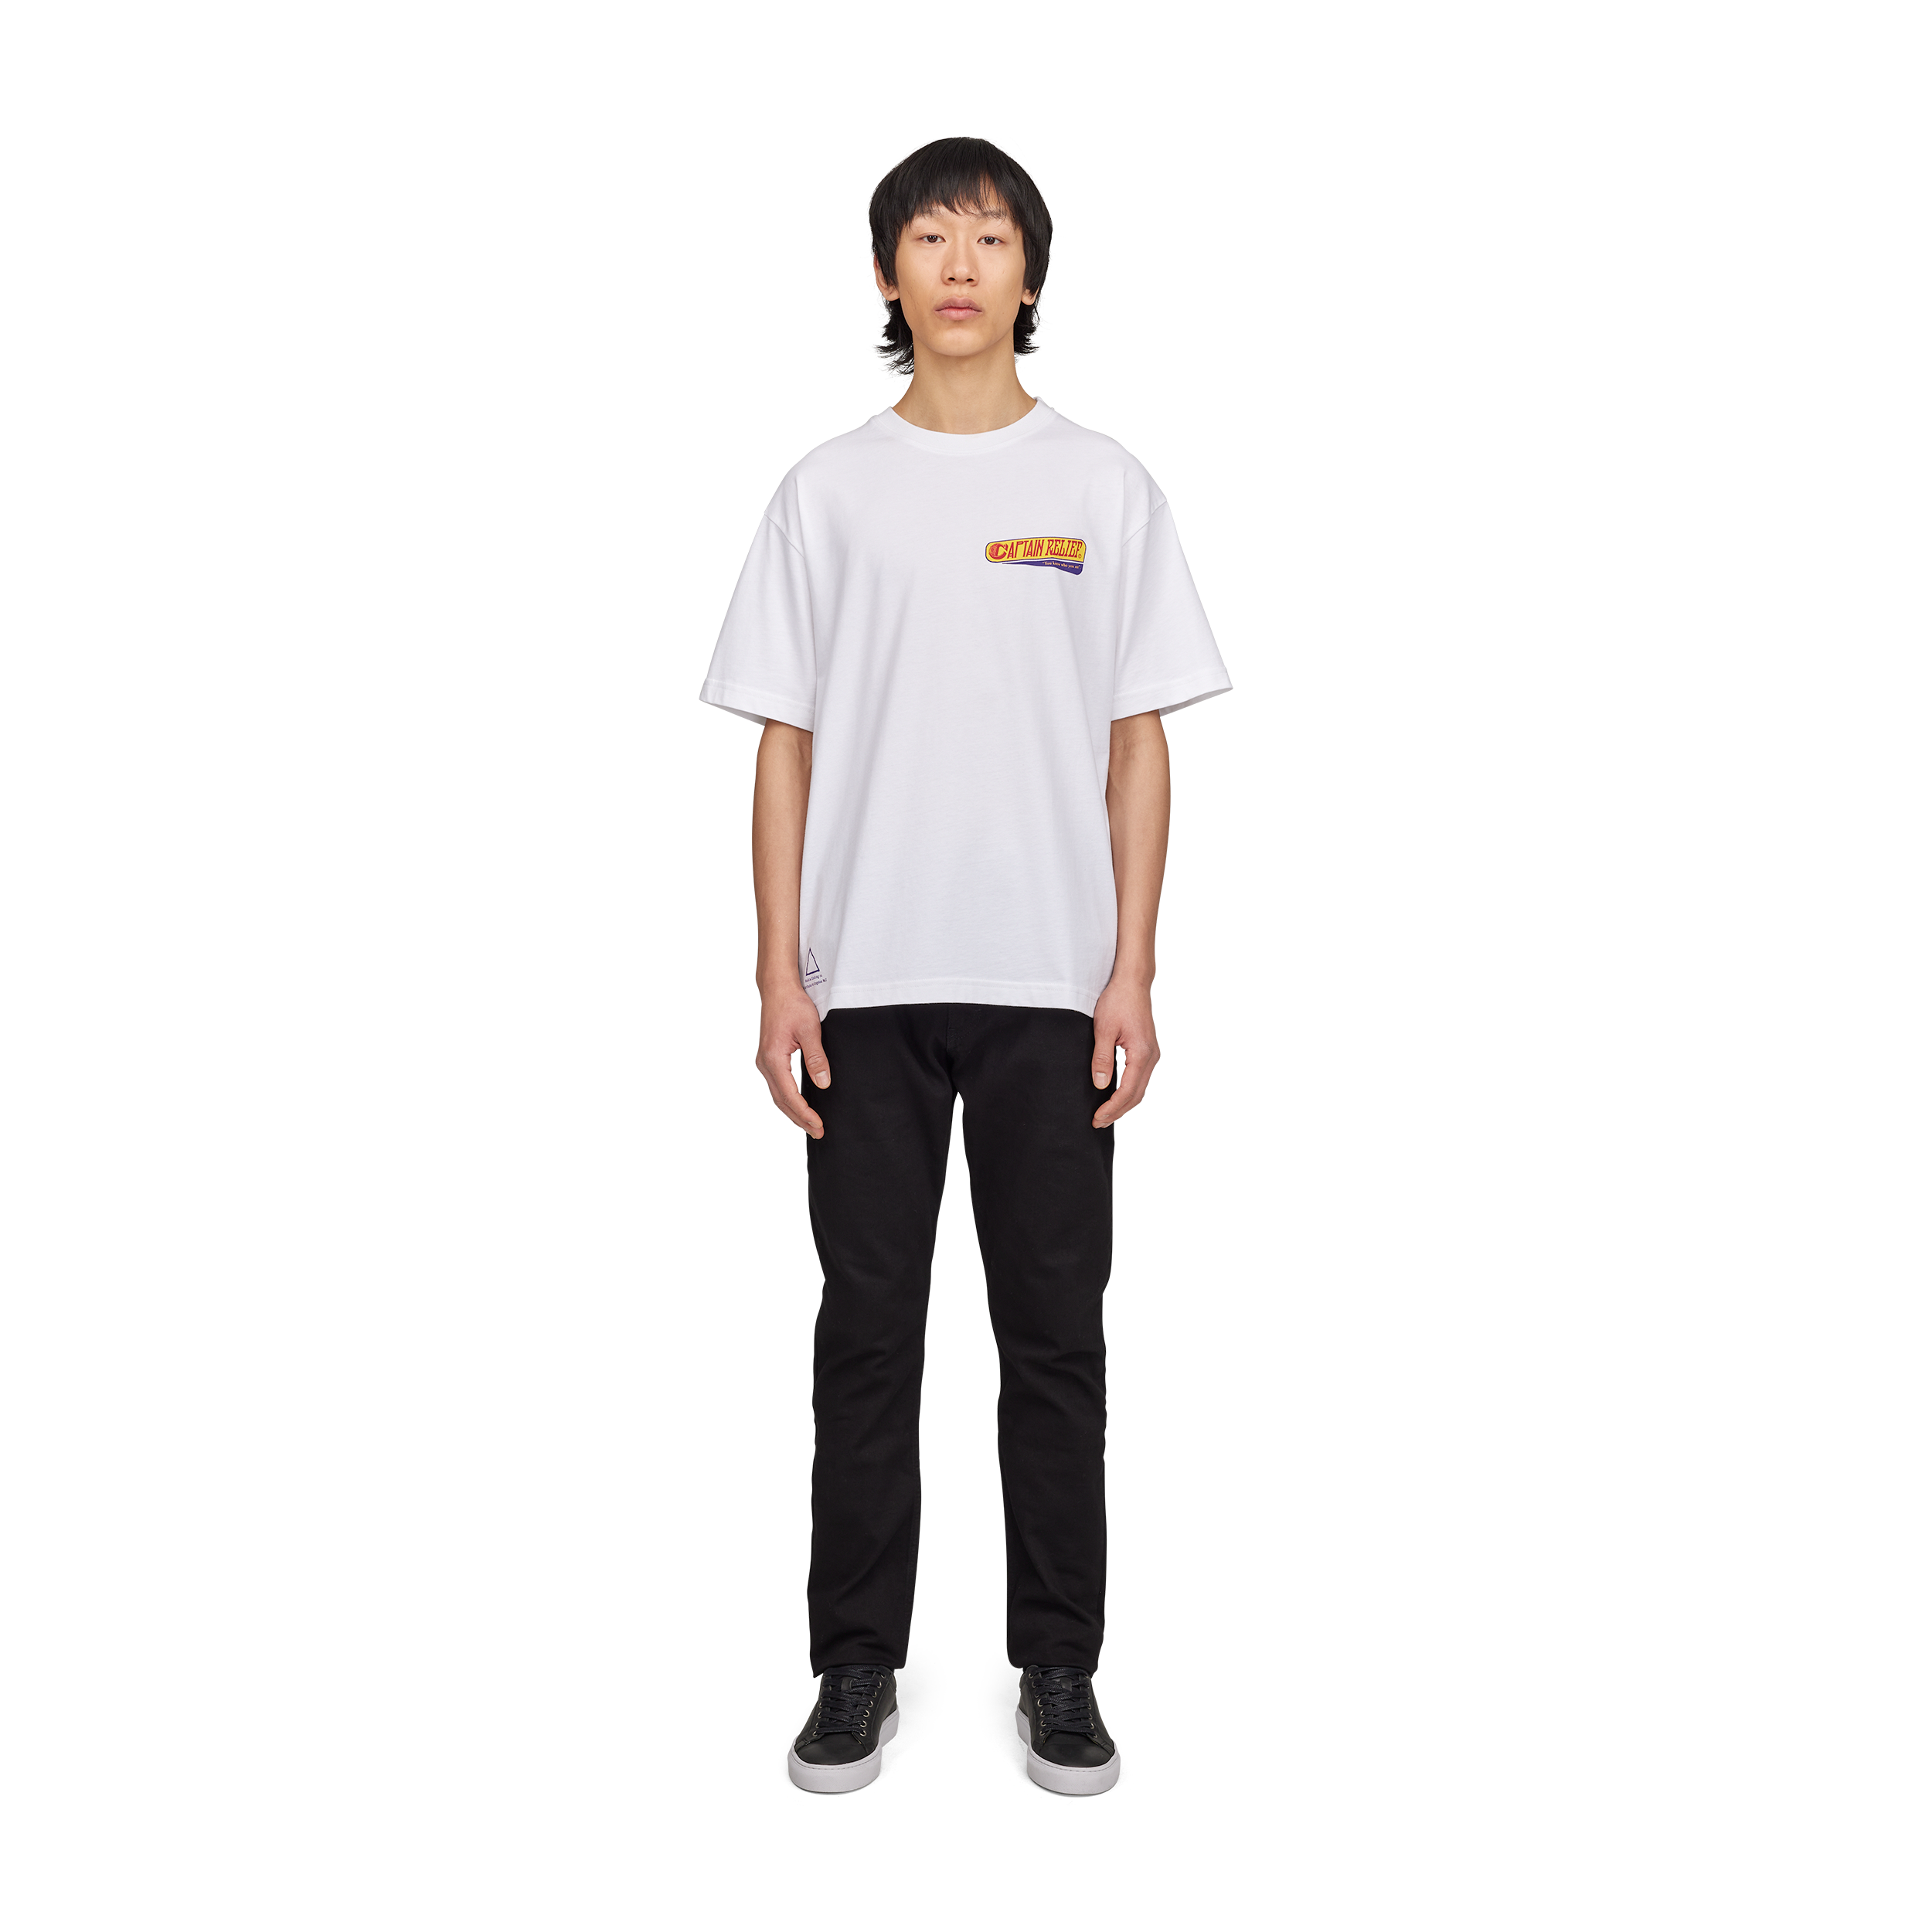 Relief T-shirt